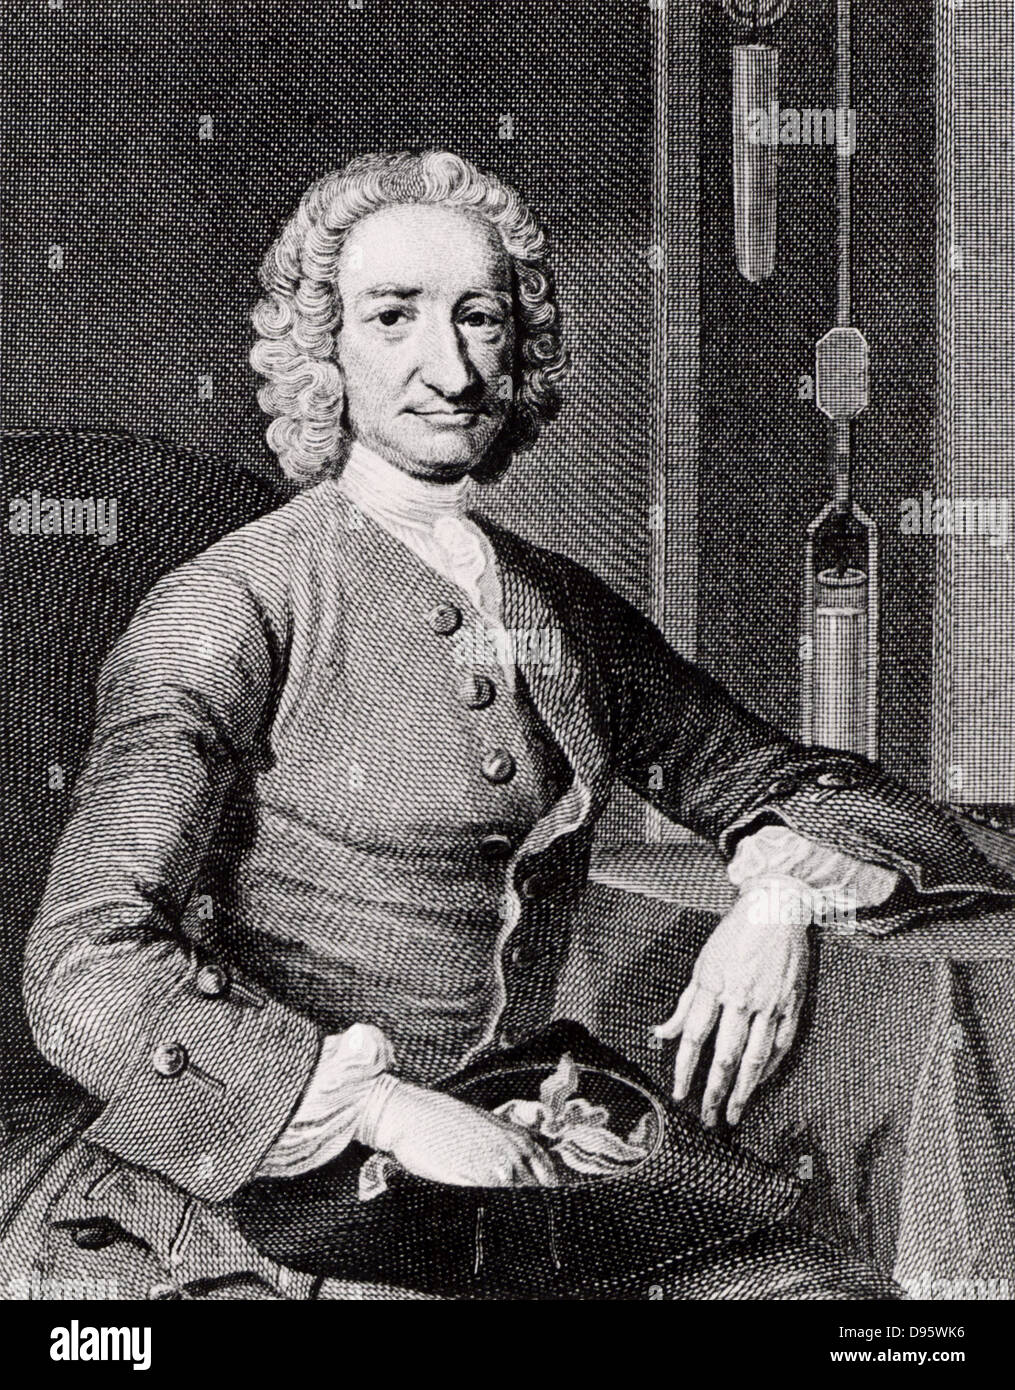 George Graham (1675-1751) English clockmaker and inventor.  Engraving after the portrait by Thomas Hudson (1701-1779).  In the background is part of a weight-driven clock with a mercury compensated pendulum, one of Graham's inventions. Stock Photo